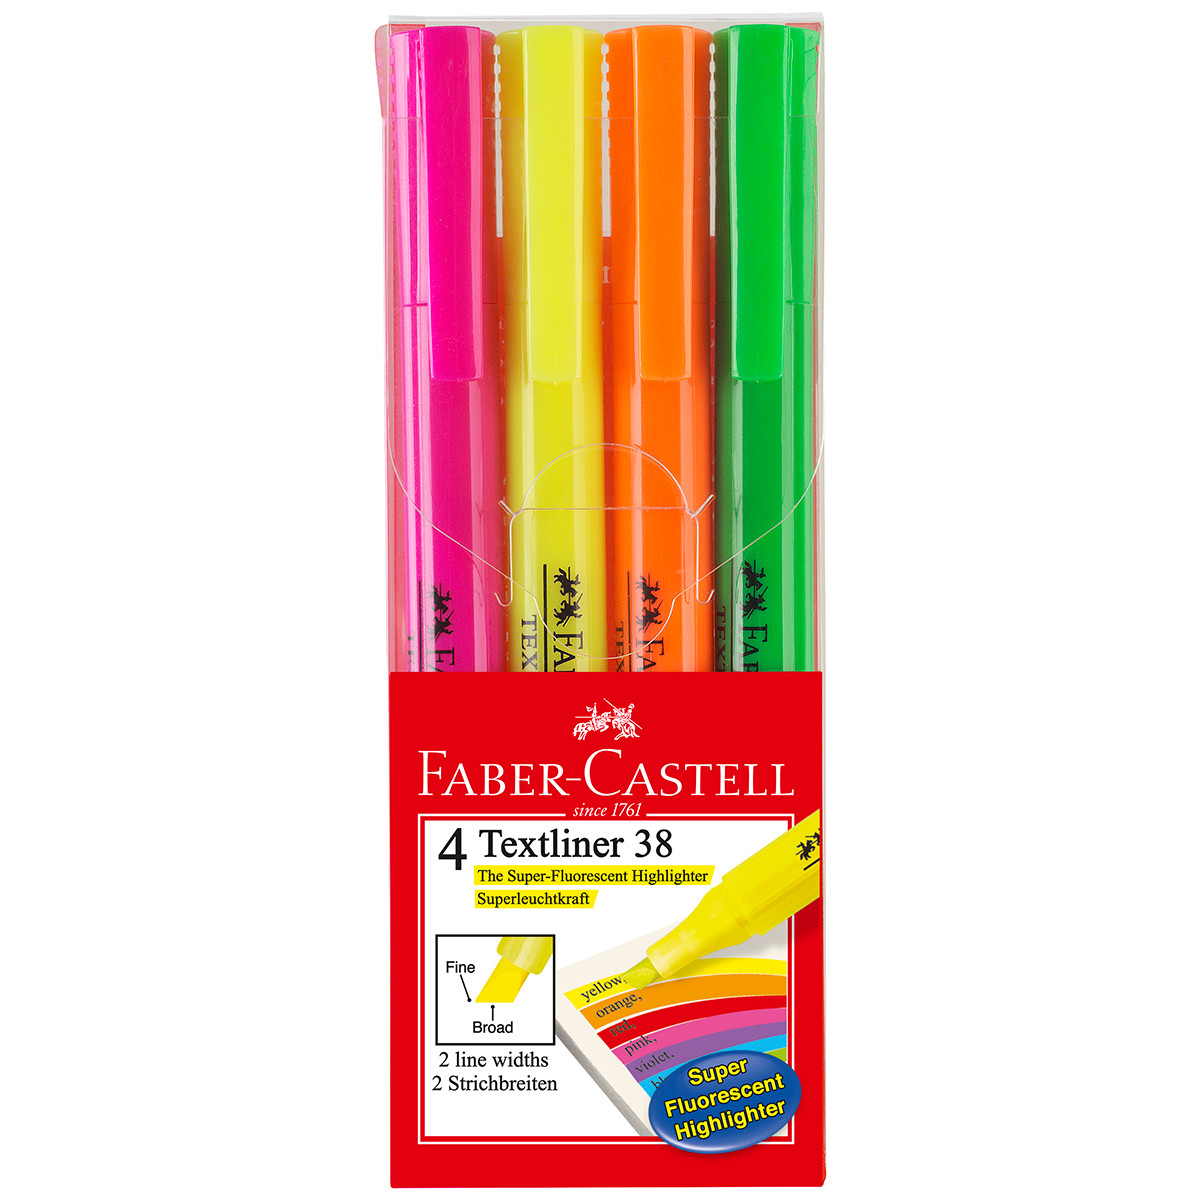 Faber-Castell Textliner 38 Highlighters - Assorted Colours (Wallet of 4)